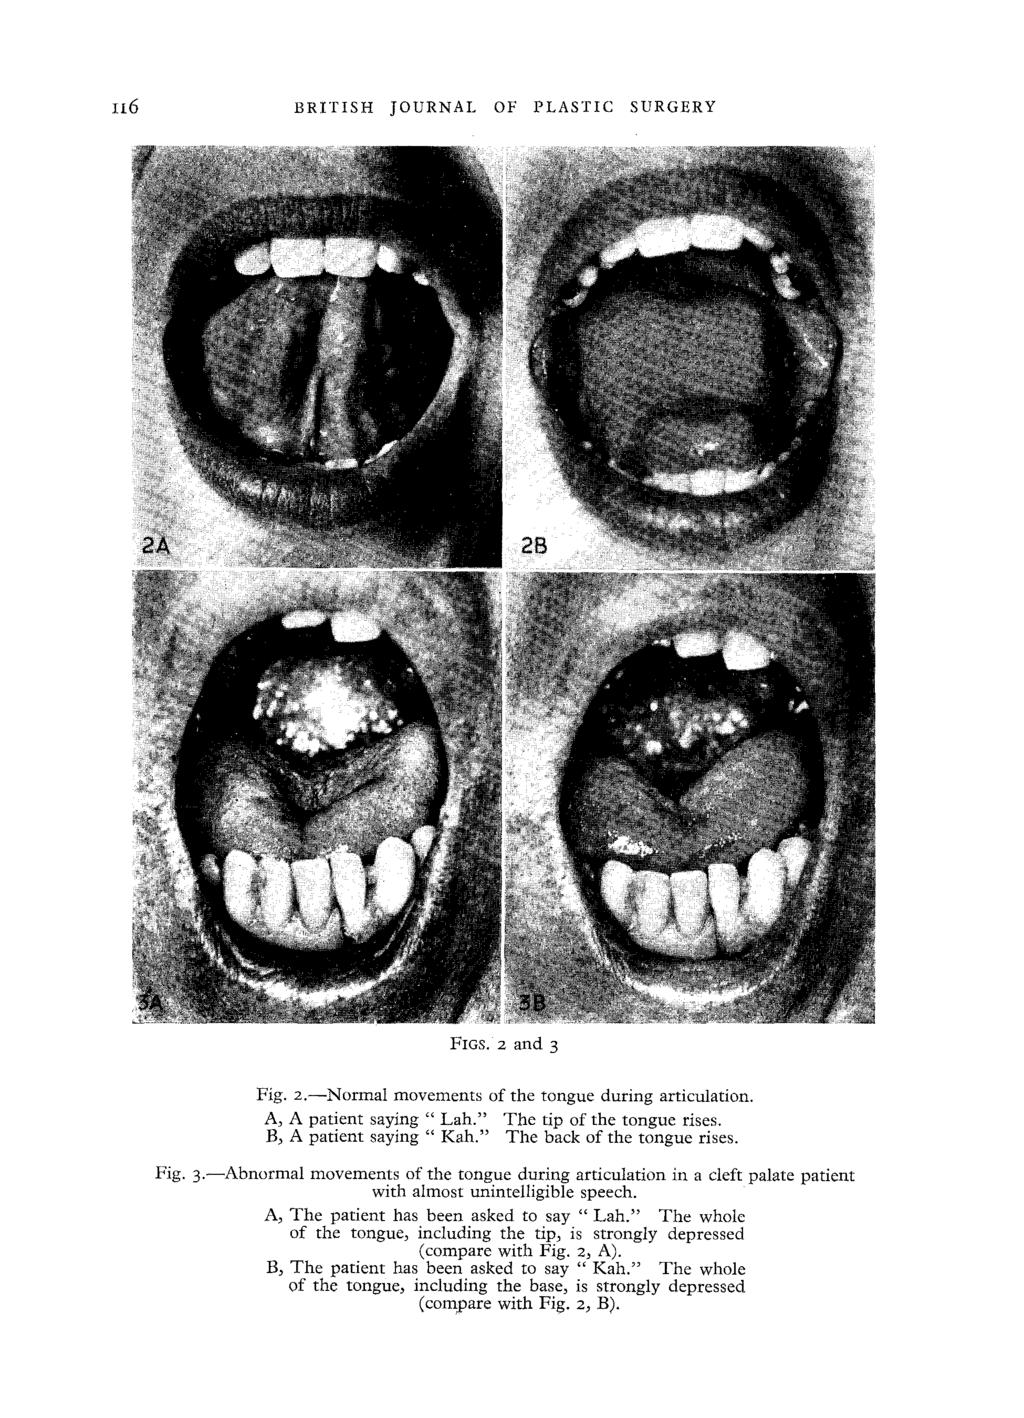 II6 BRITISH JOURNAL OF PLASTIC SURGERY FIGS, 2 and 3 Fig. 2.--Normal movements of the tongue during articulation. A, A patient saying " Lah.